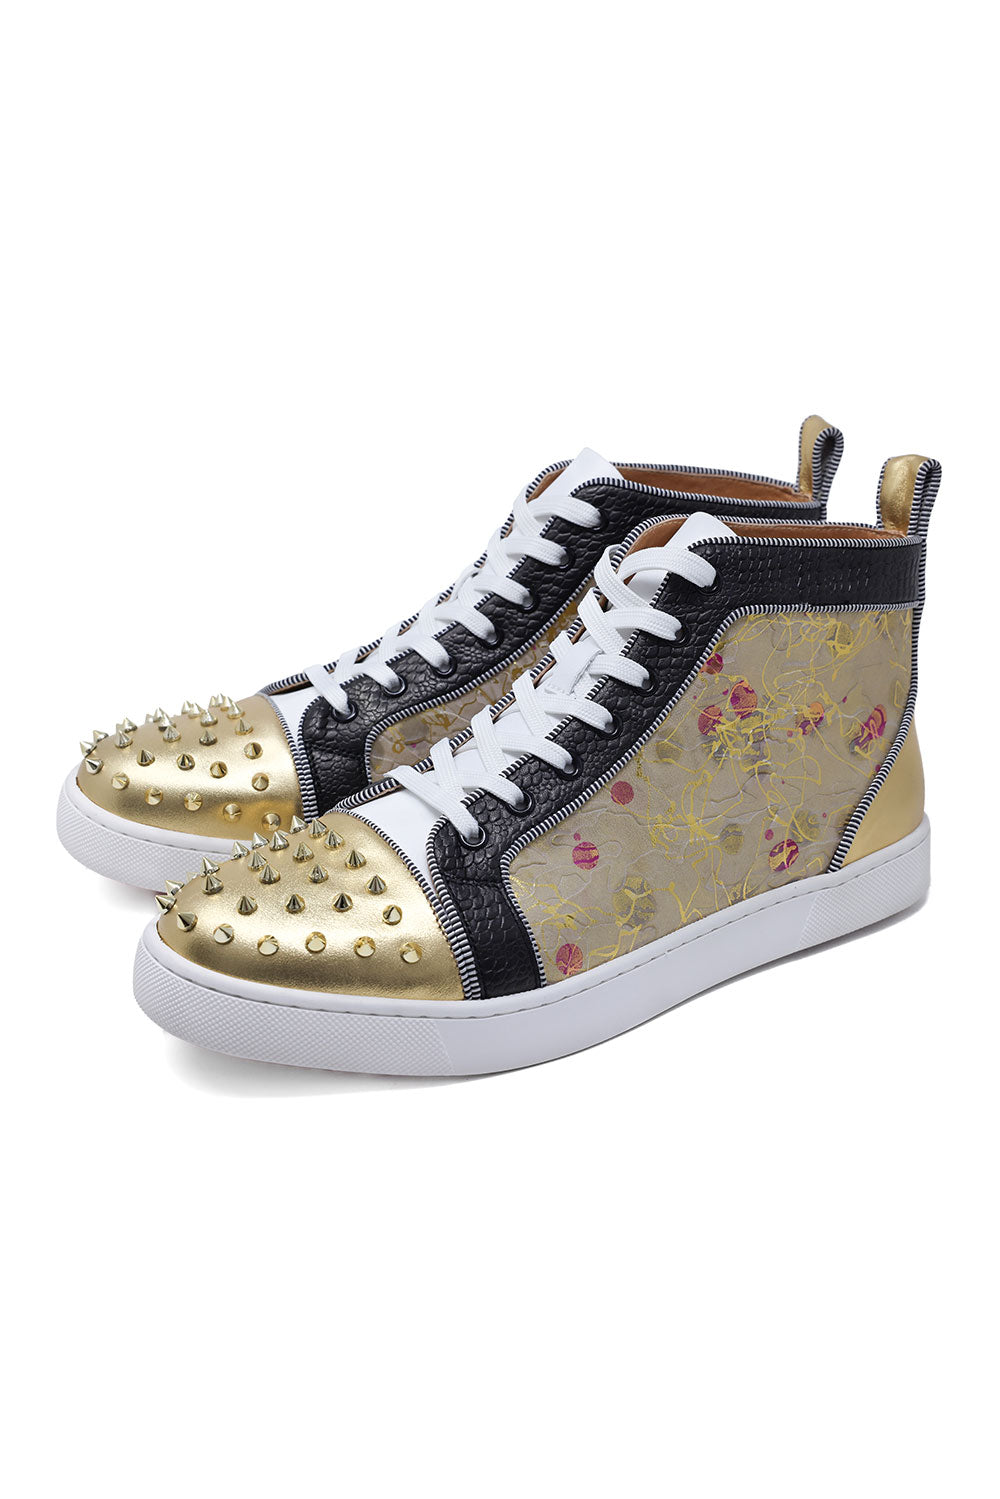 Barabas Men's Spike Floral Shiny Design High-Top Luxury Sneakers SH731 Gold